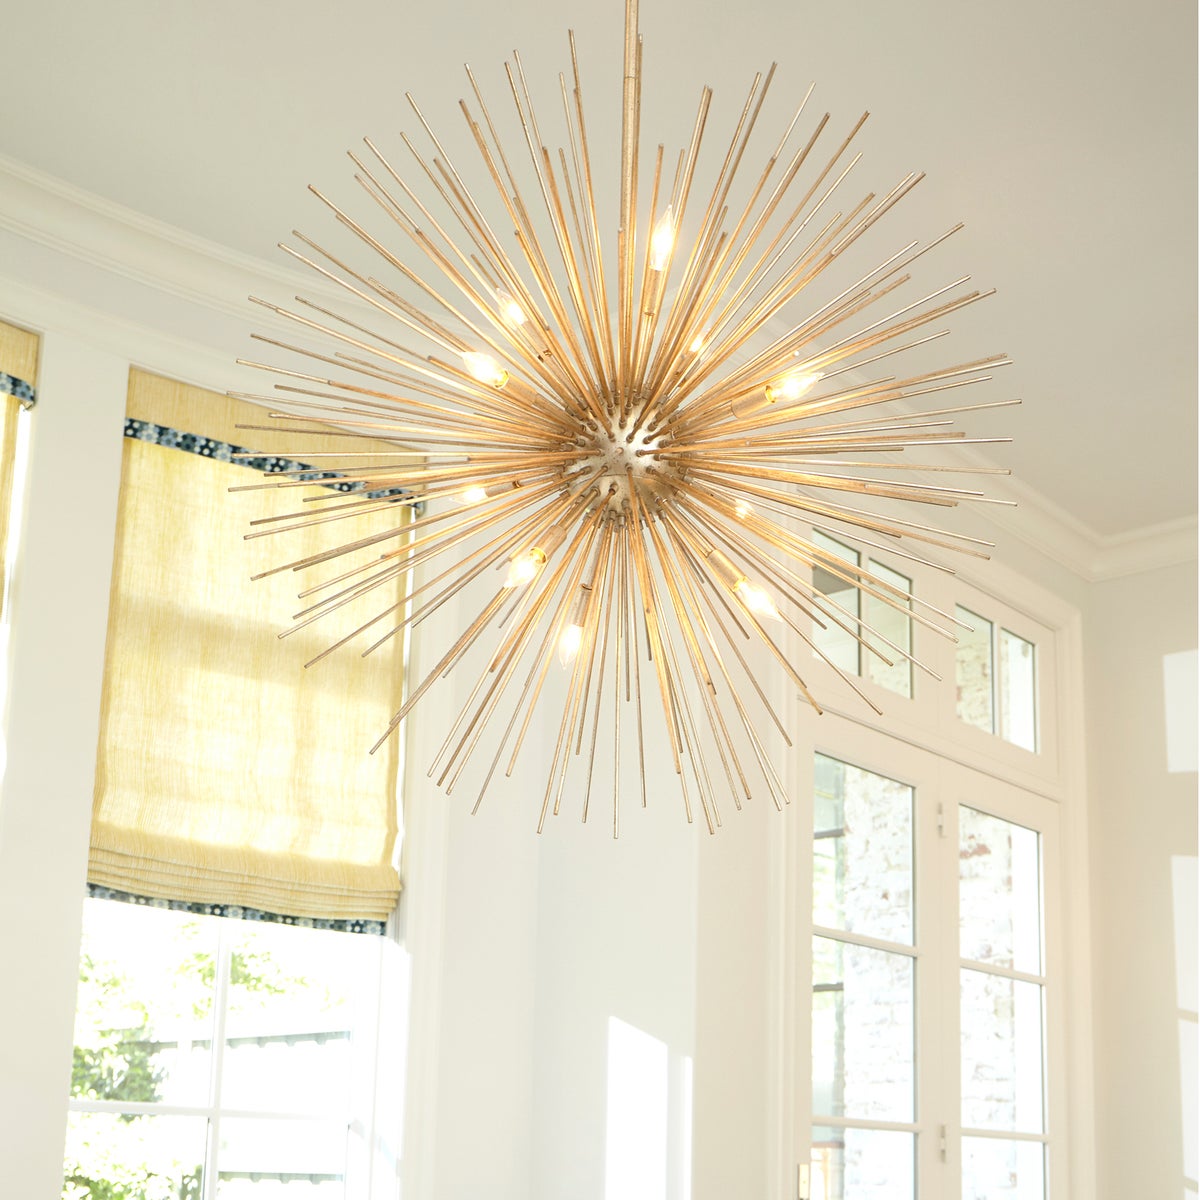 Modern Pendant Light: A stunning burst of gold leaf spires and candelabra lighting creates an electrified dandelion effect in this chandelier.